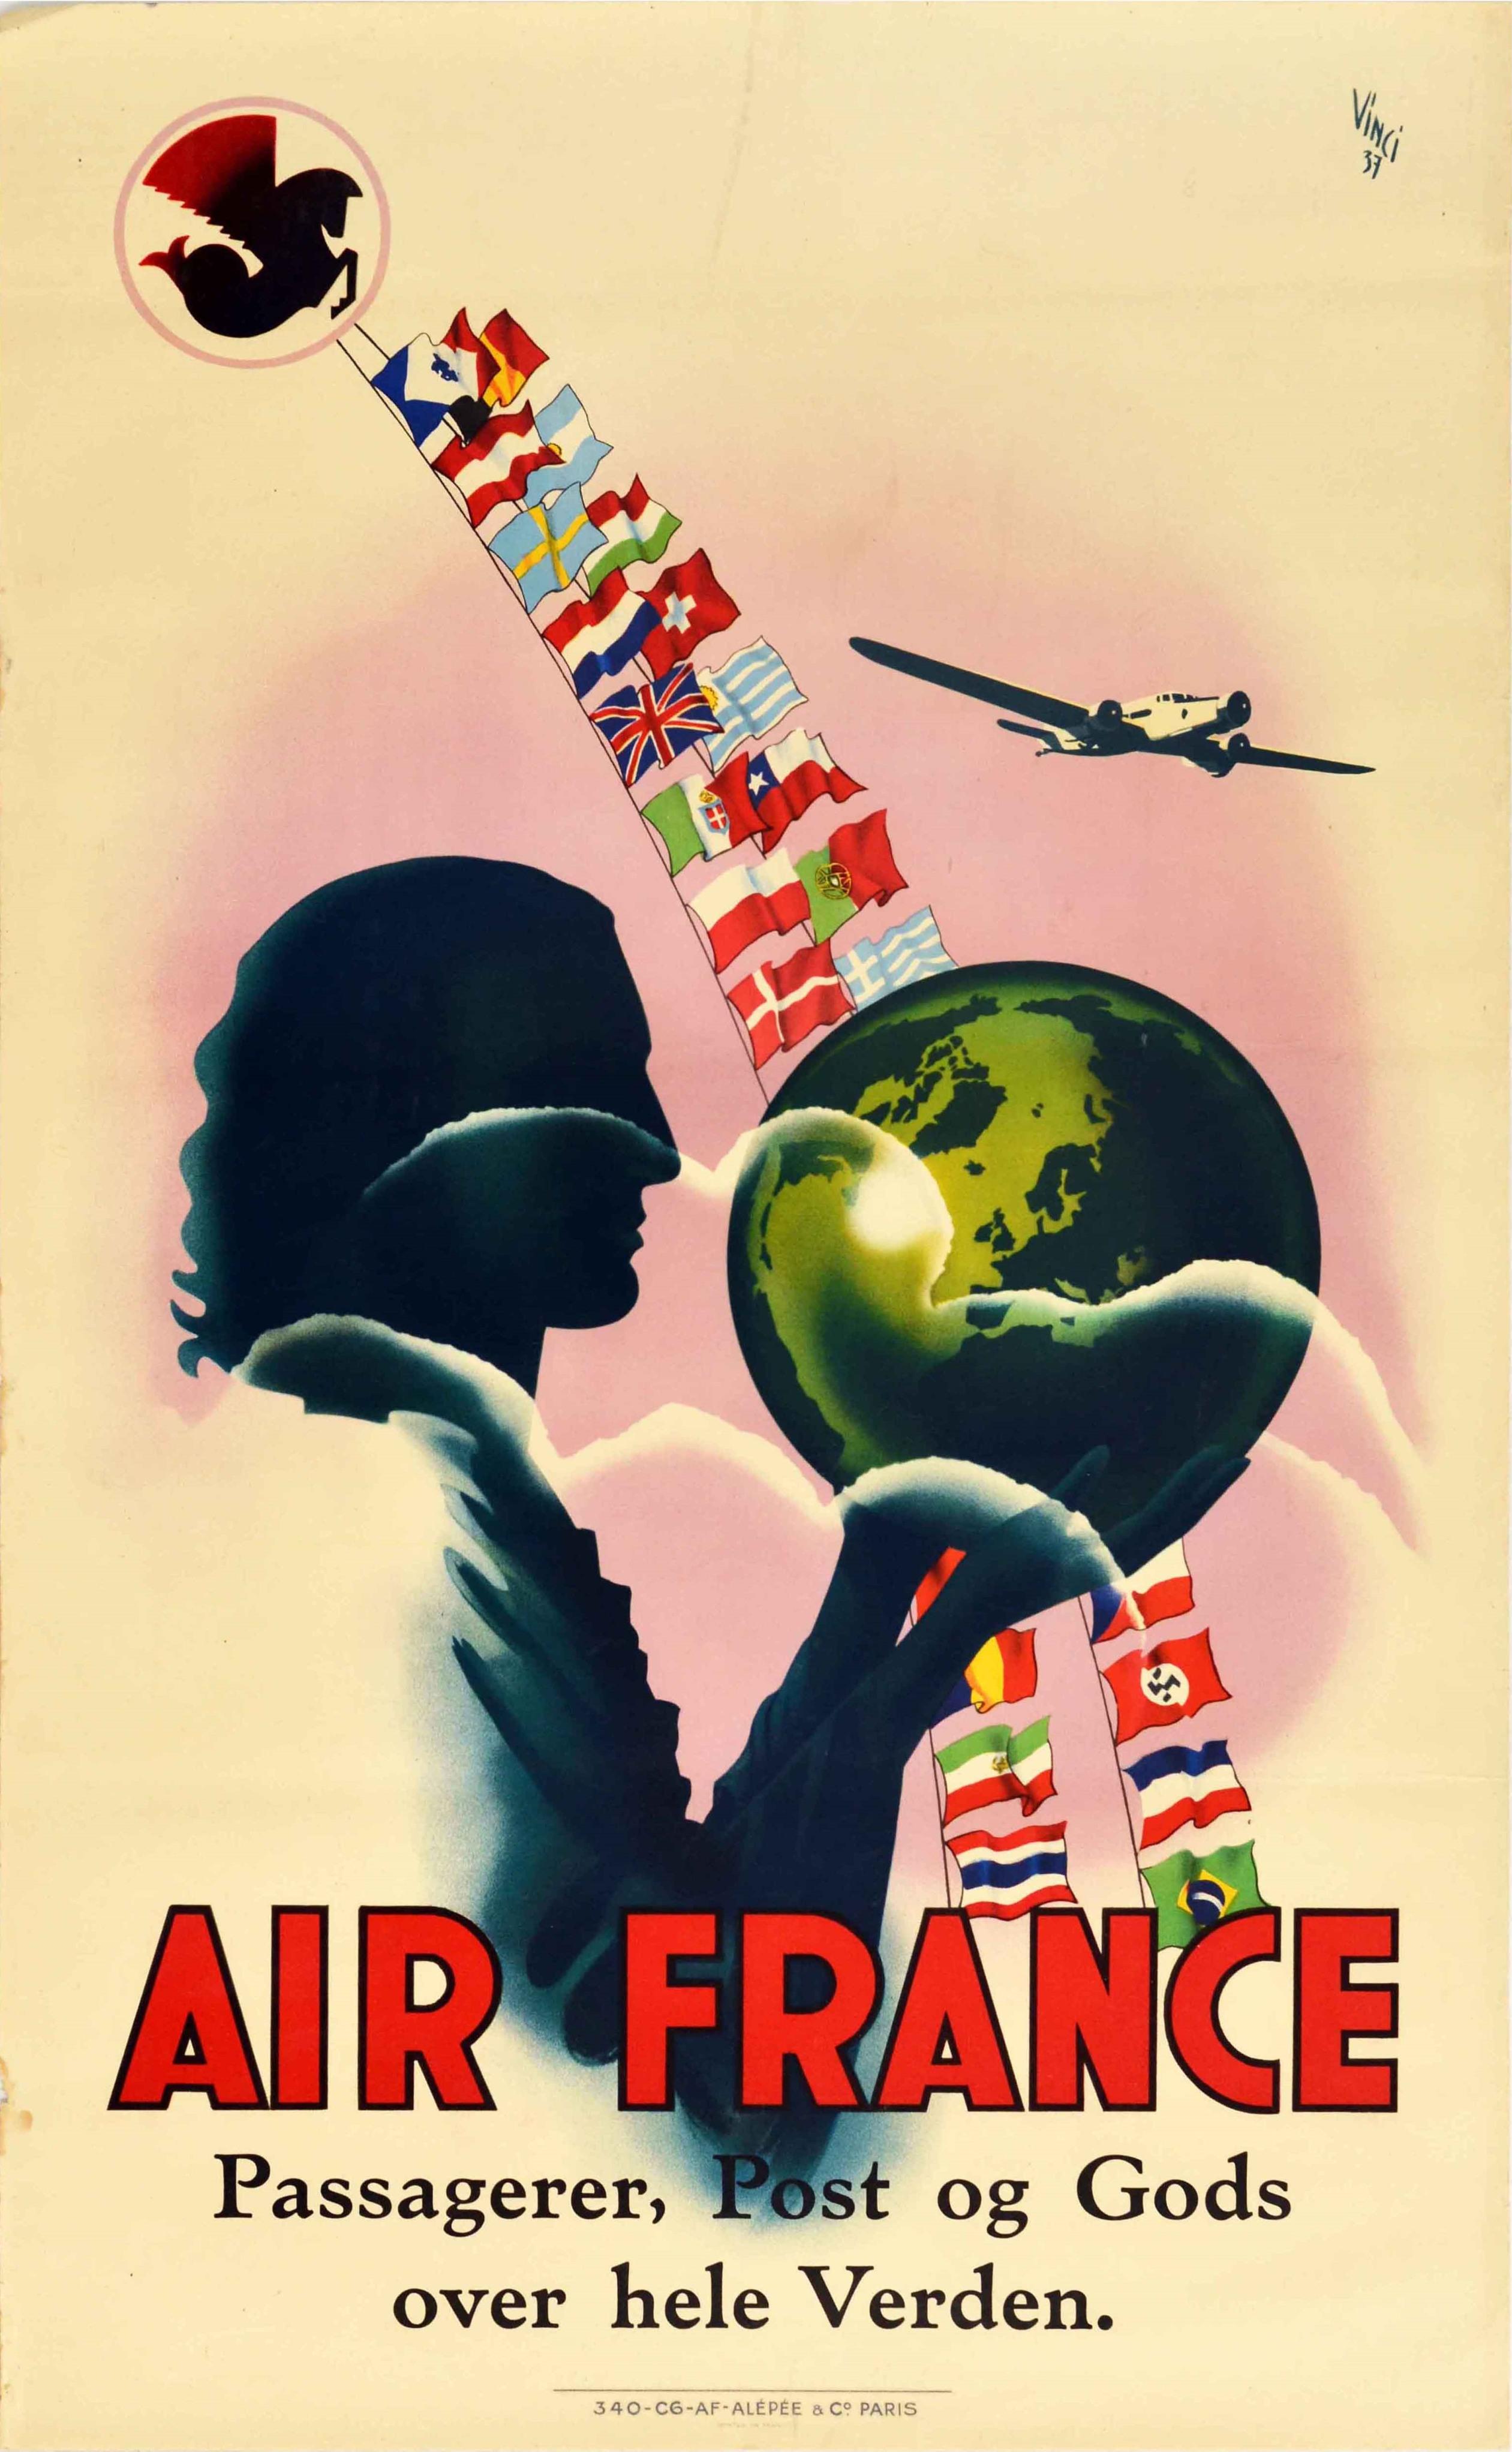 Original vintage Air France poster advertising Passagerer, Post og Gods over hele Verden / Passengers, Mail and Freight Worldwide. Colourful Art Deco design depicting the silhouette of a person holding a globe of the earth in front of a string of